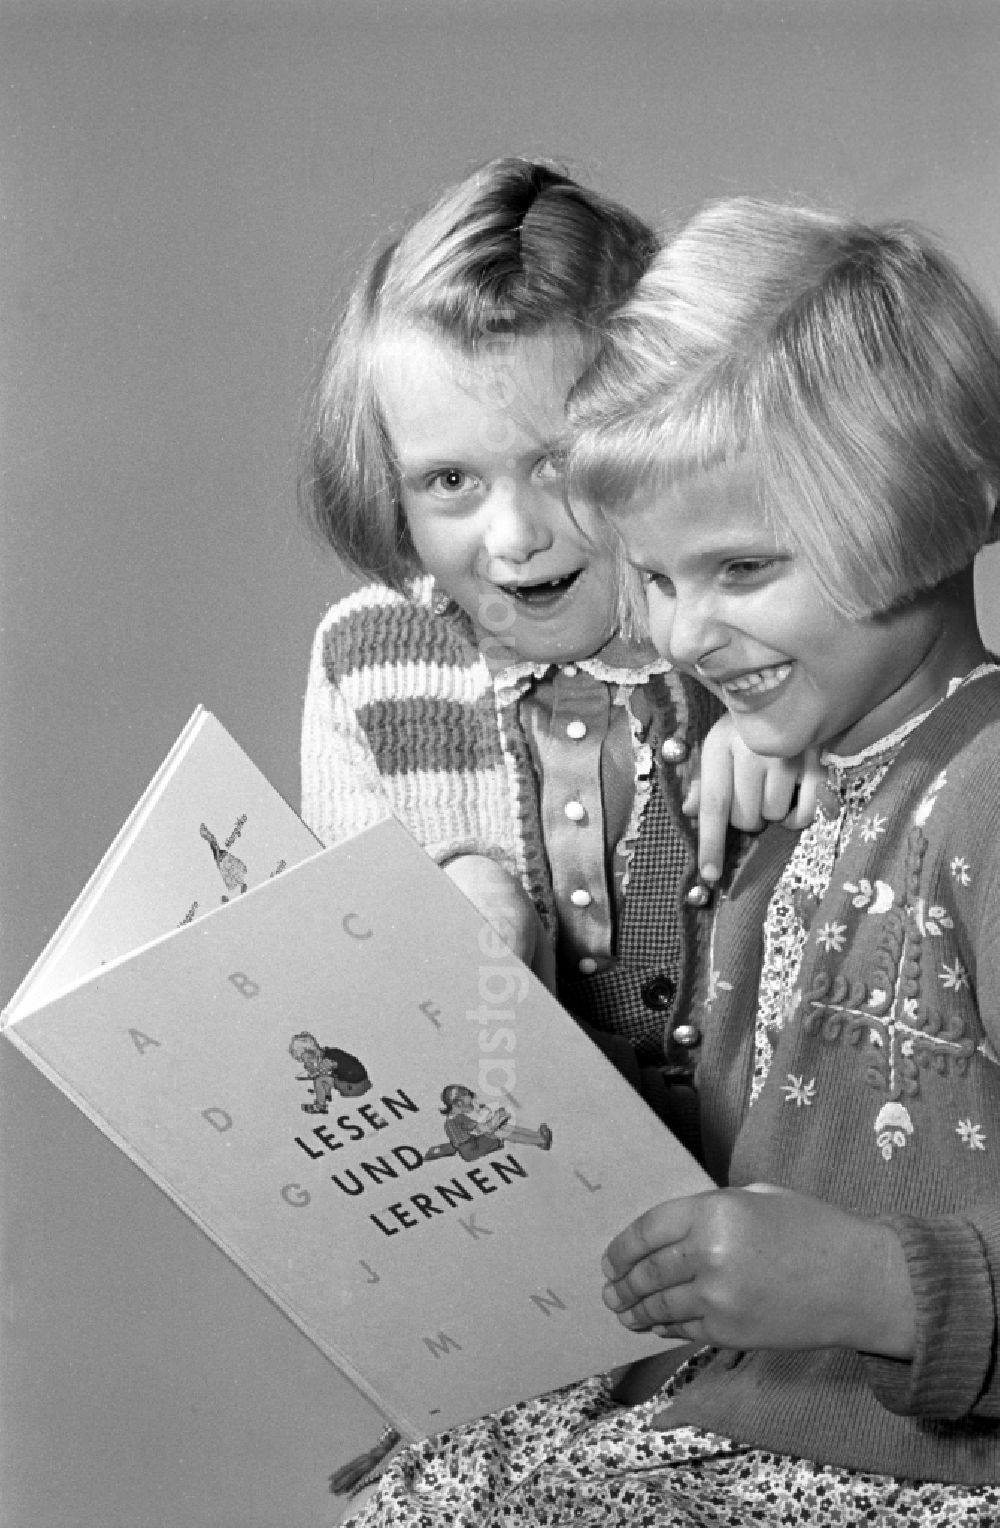 GDR photo archive: Dresden - Children on the occasion of the start of school for two young girls enthusiastically looking at a school book on the German language Unsere Fiebel in the district of Altstadt in Dresden in the state of Saxony on the territory of the former GDR, German Democratic Republic